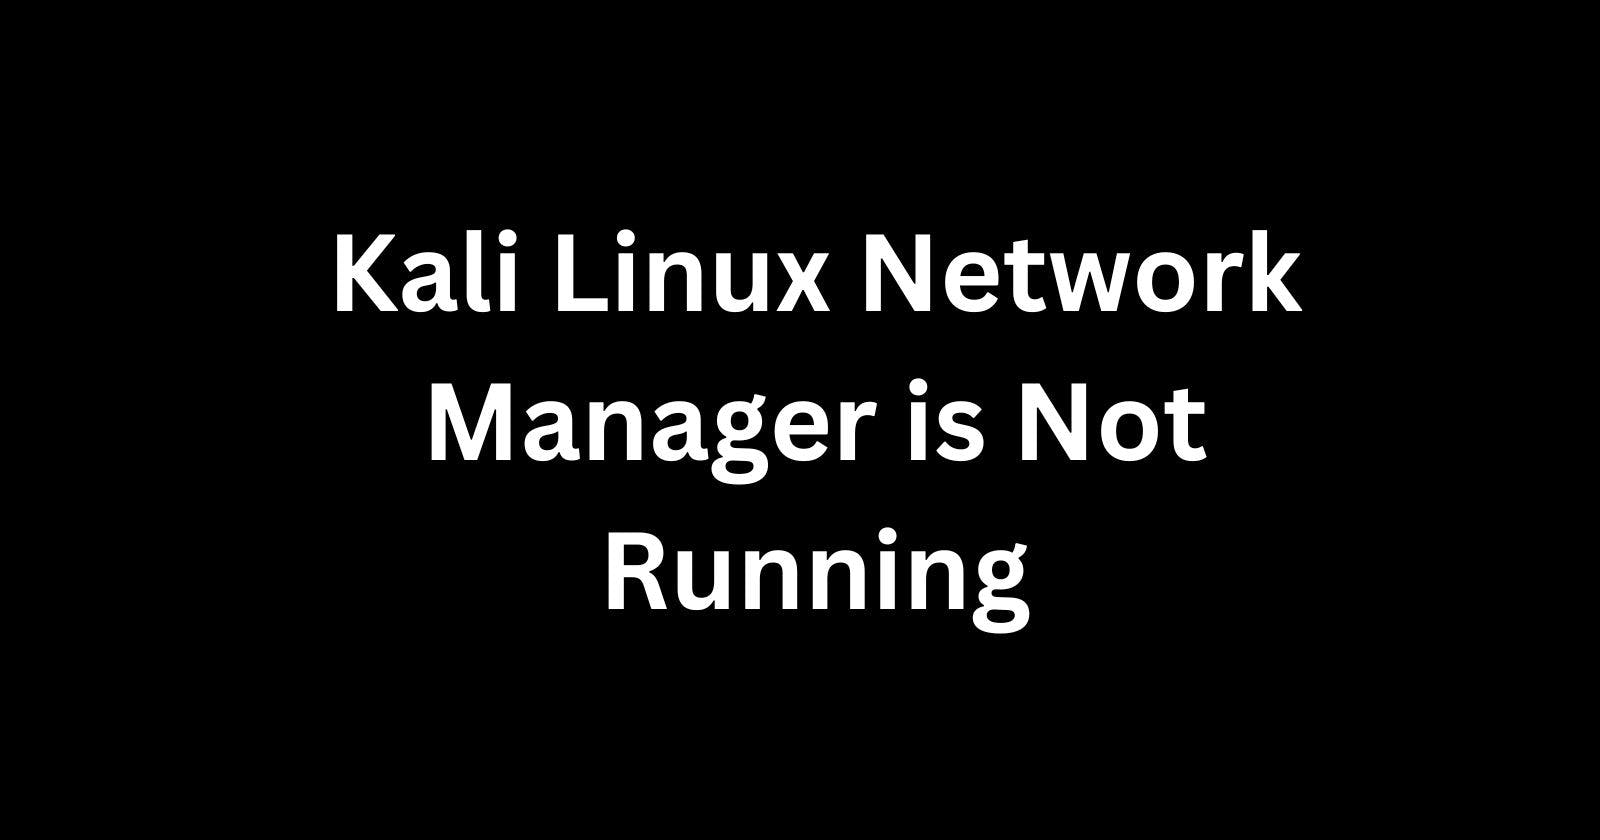 Troubleshooting When Kali Linux Network Manager is Not Running